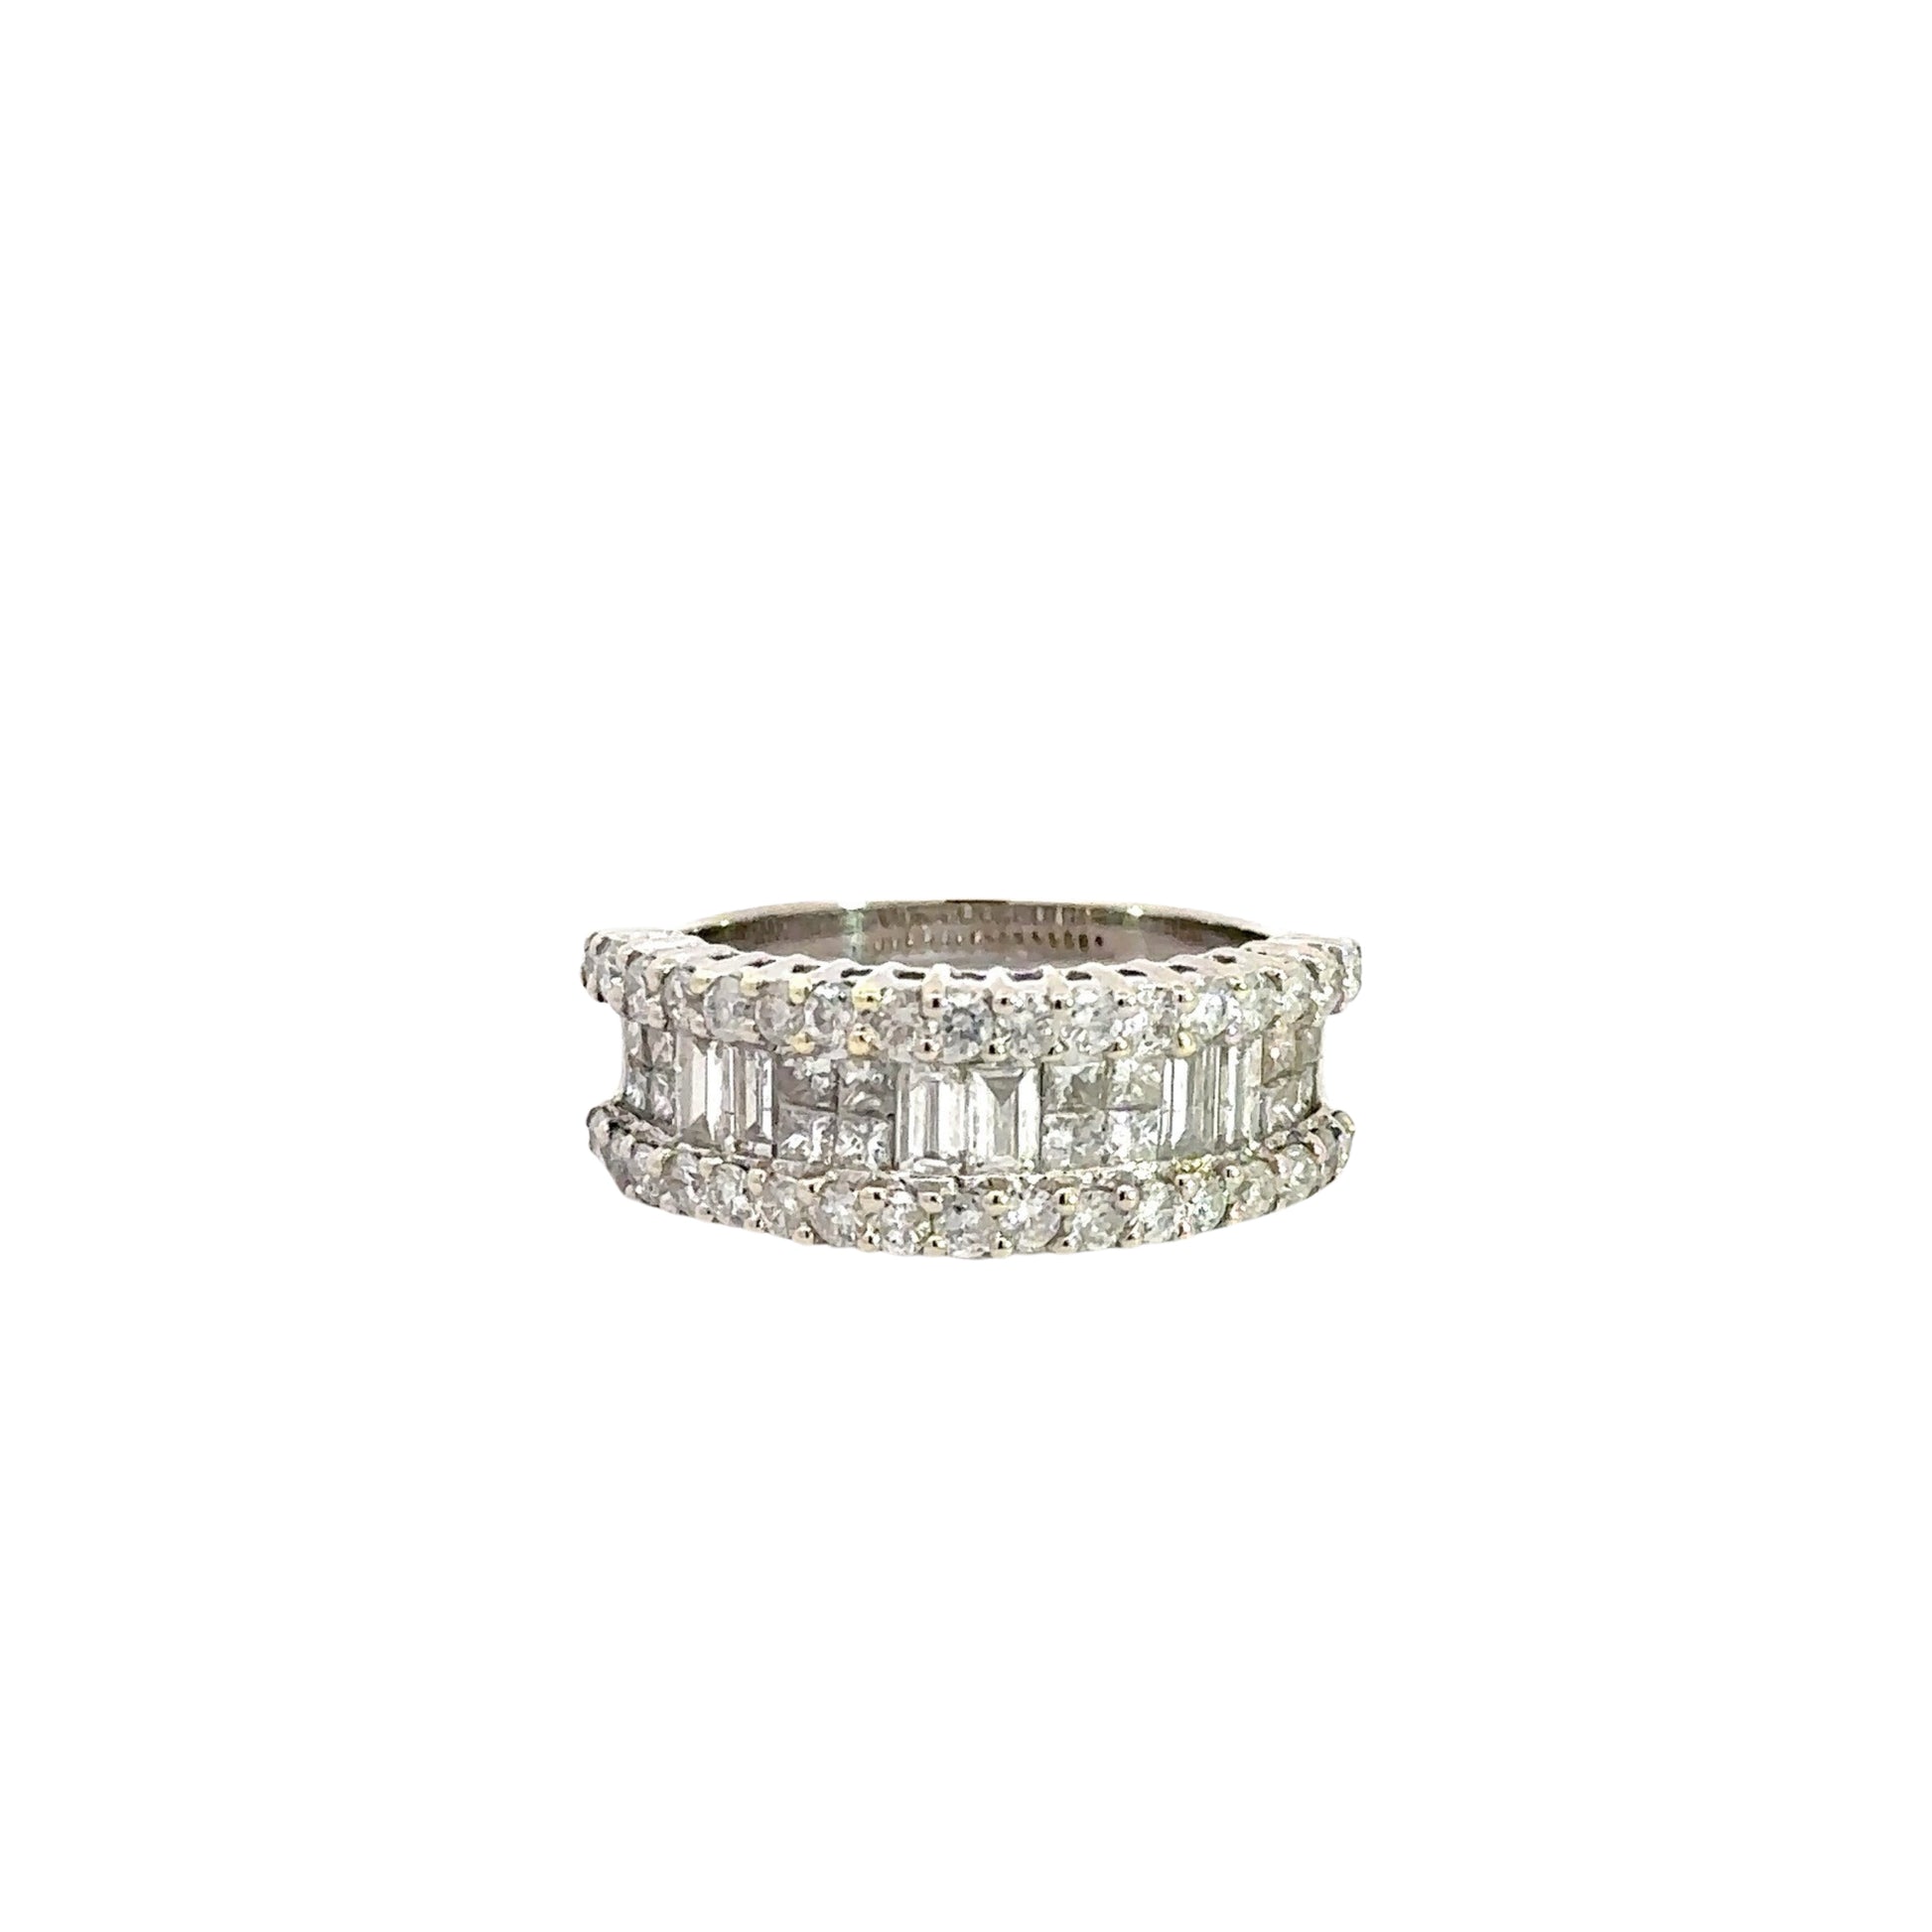 front of white gold band ring with round diamonds on top and bottom and alternating baguette and princess-cut diamonds in middle